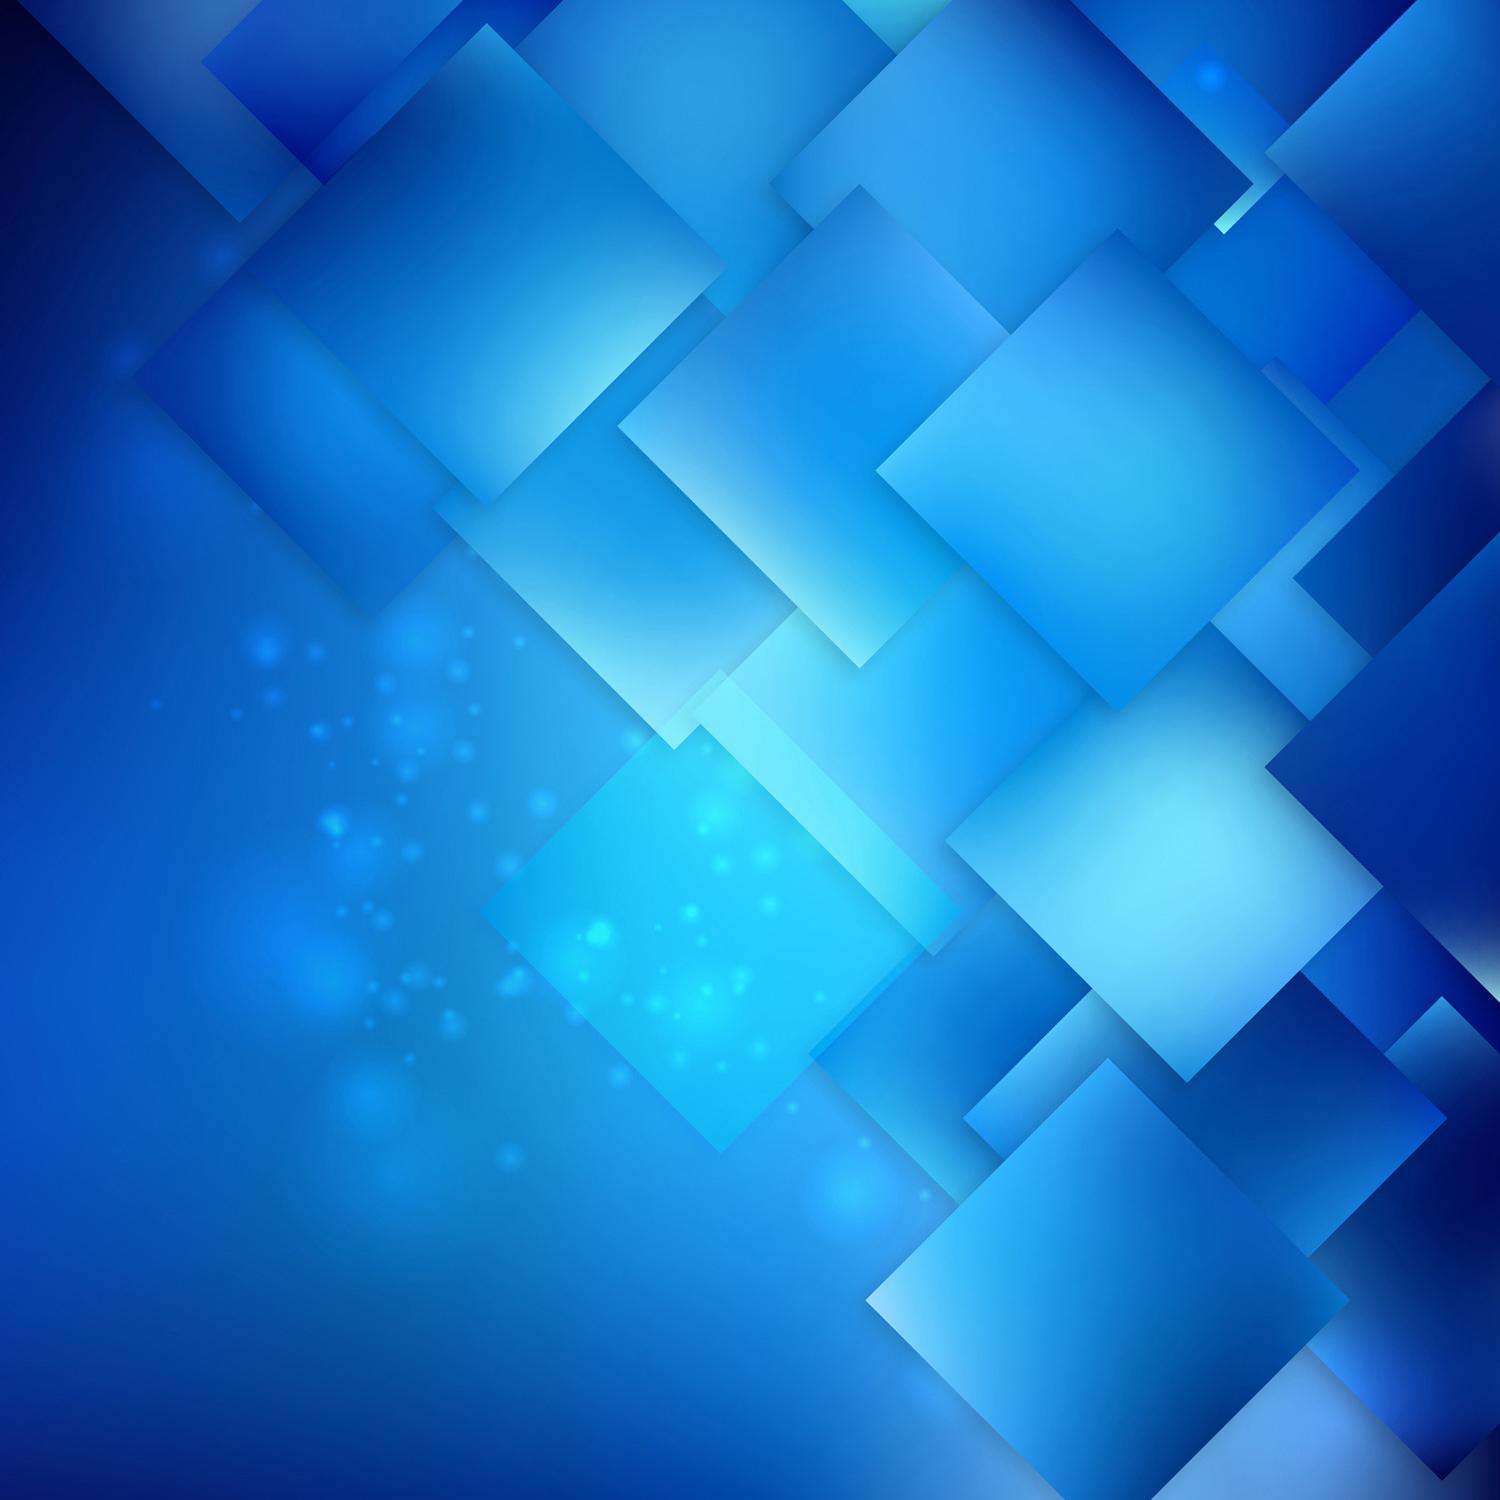 Buy 3D Abstract Blue Wallpaper Online in India at Best Price